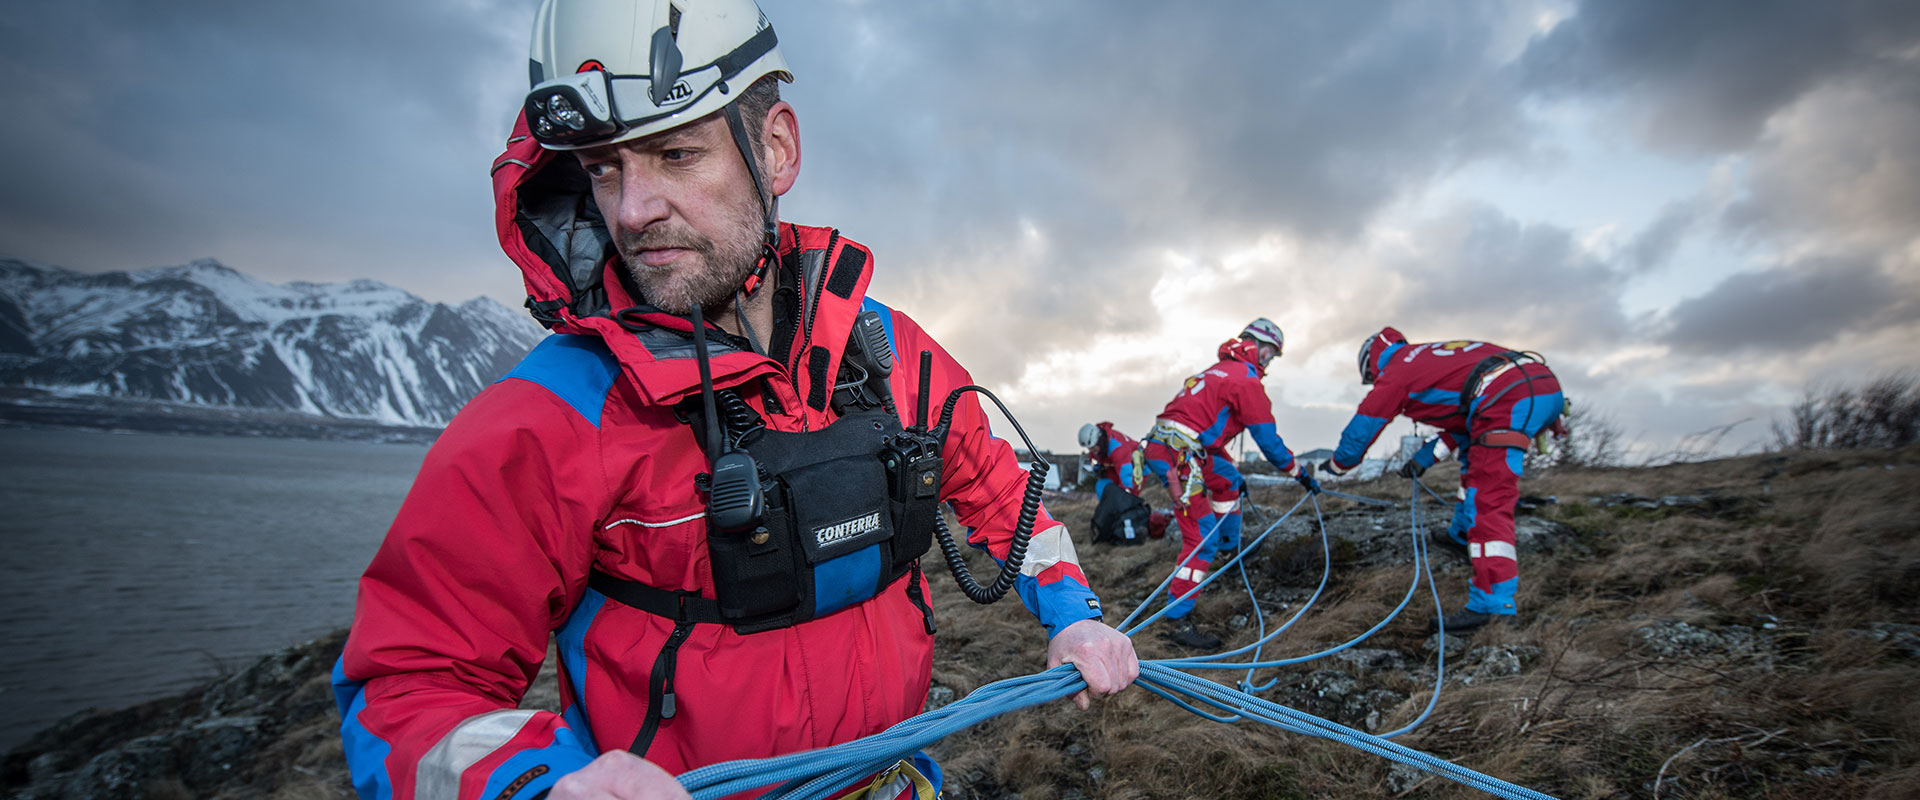 Icelandic Search & Rescue personnel wearing Taiga workwear in a barren environment